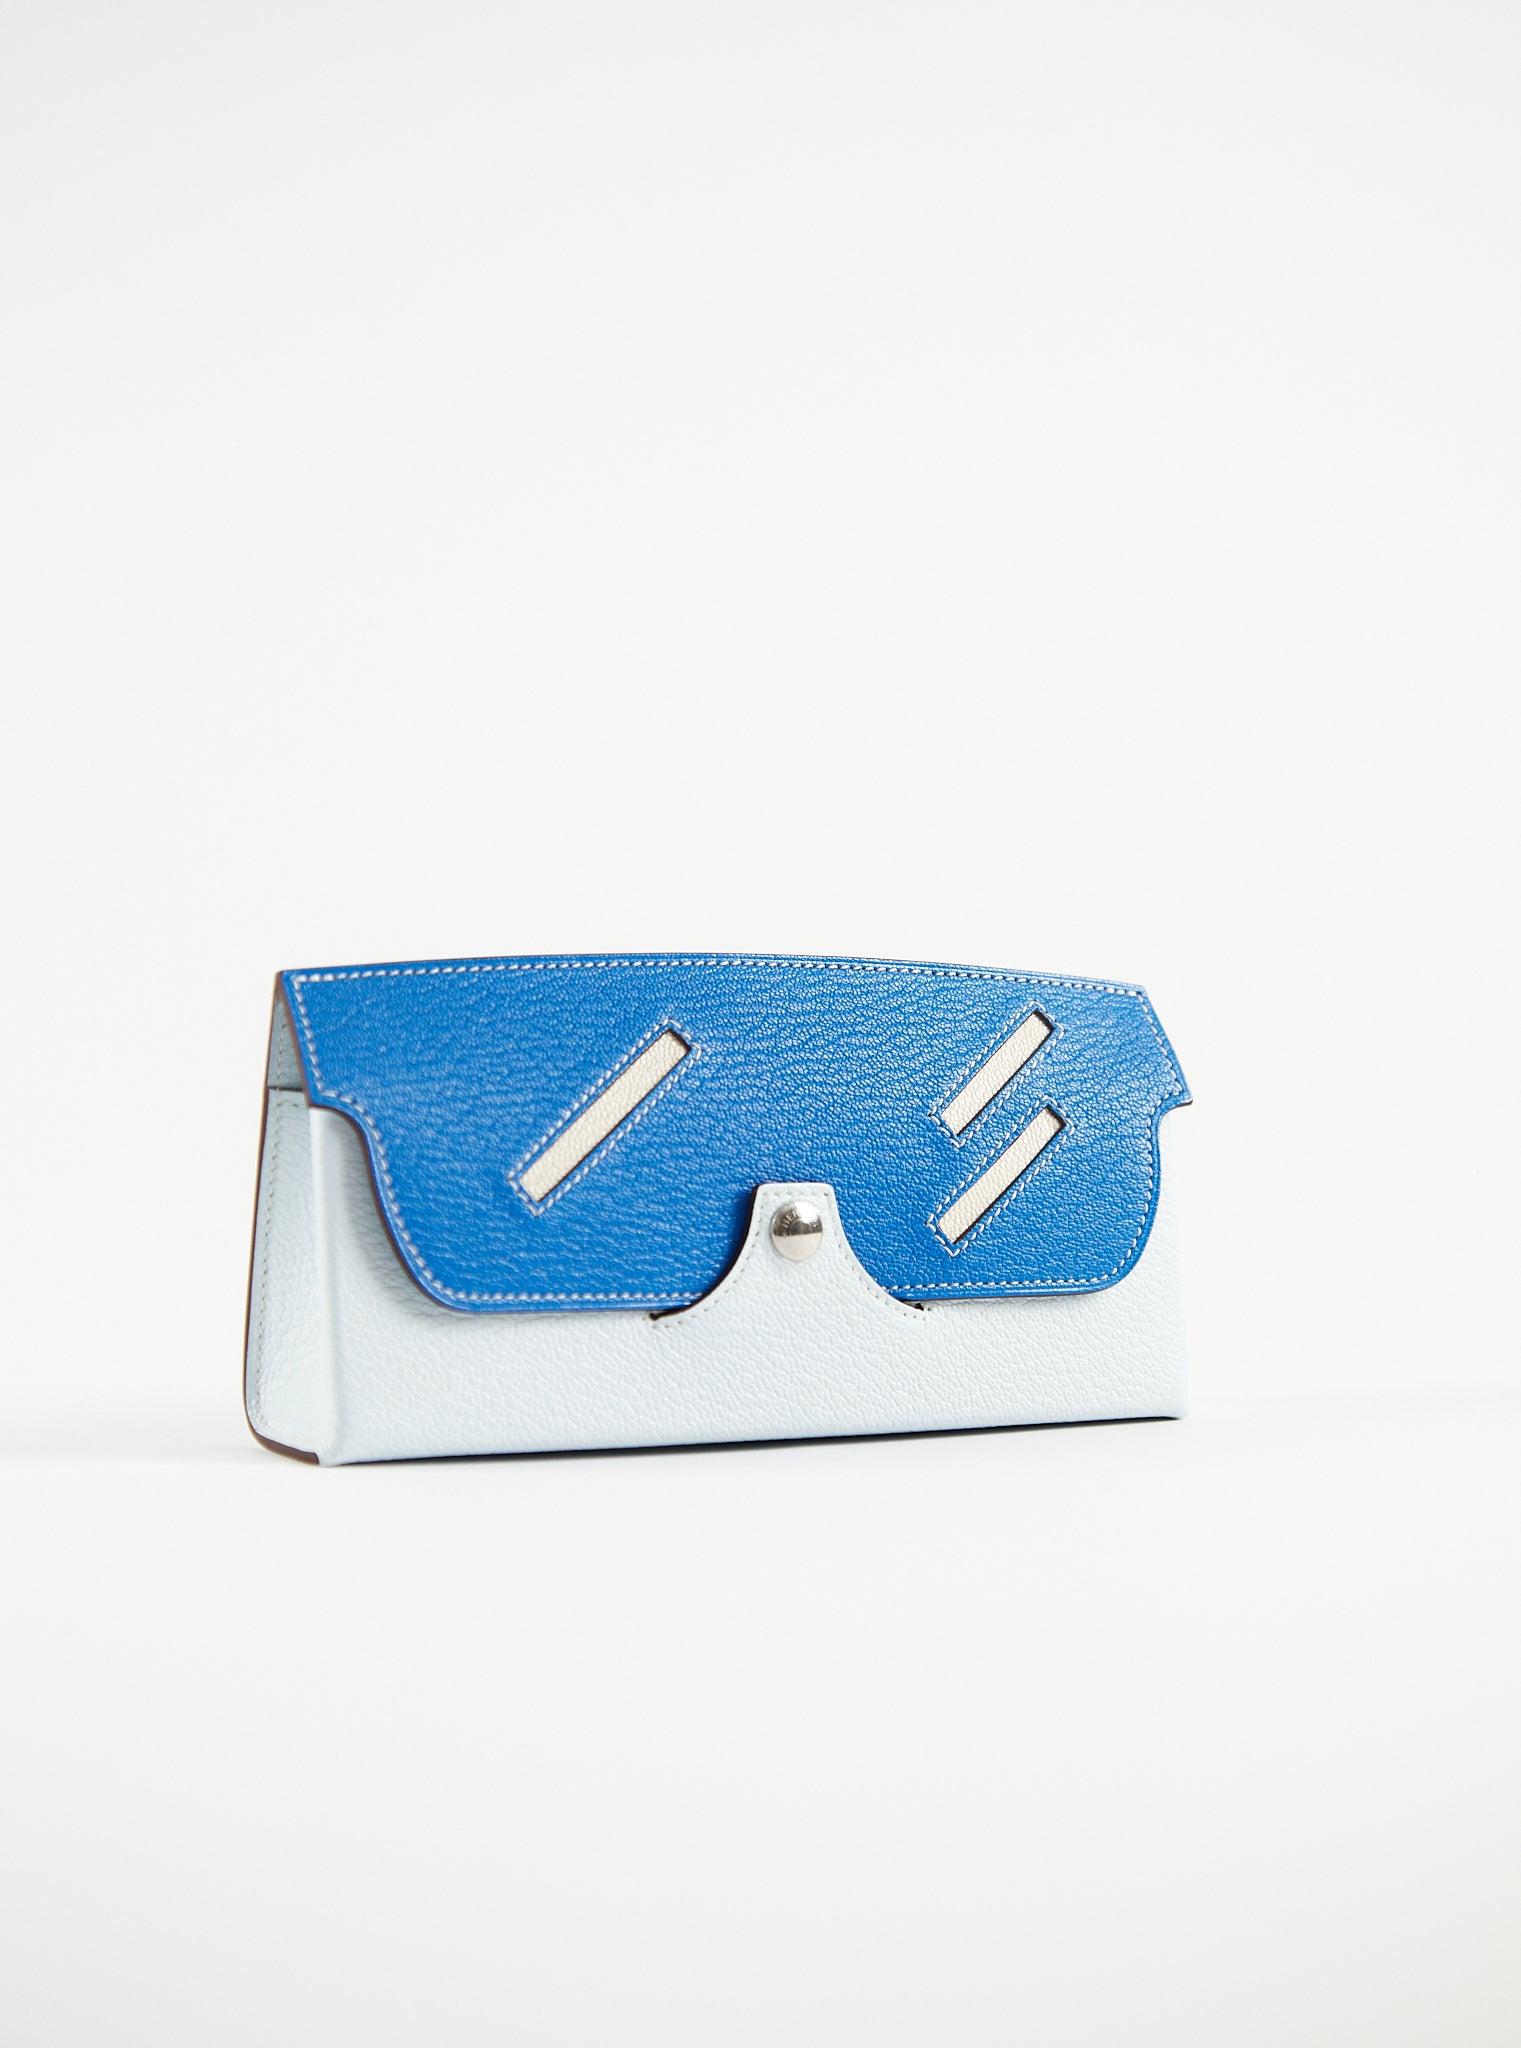 Hermès In the Loop Wink Glasses Case in Blue Brume & Blue France  

Chevre Mysore Leather with Palladium Plated Snap Closure 

Removable lanyard

Accompanied by: Hermès Box & Ribbon 

Dimensions: L 7.1